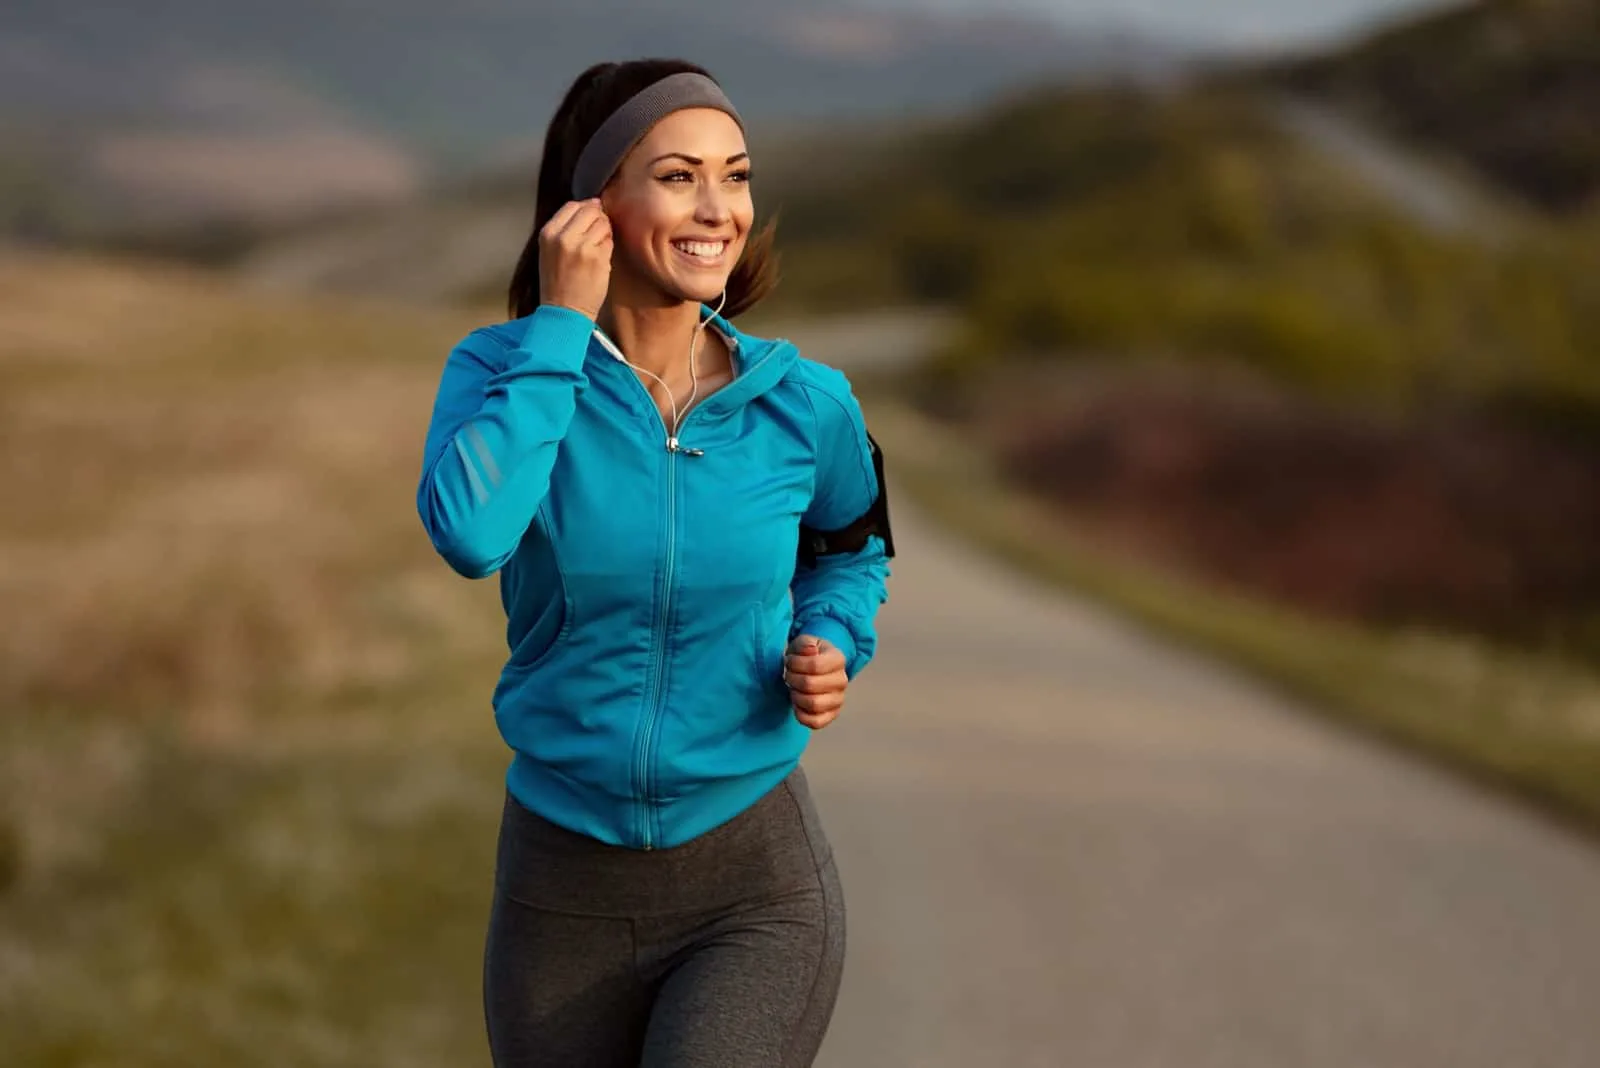 a smiling woman with headphones on her ears running